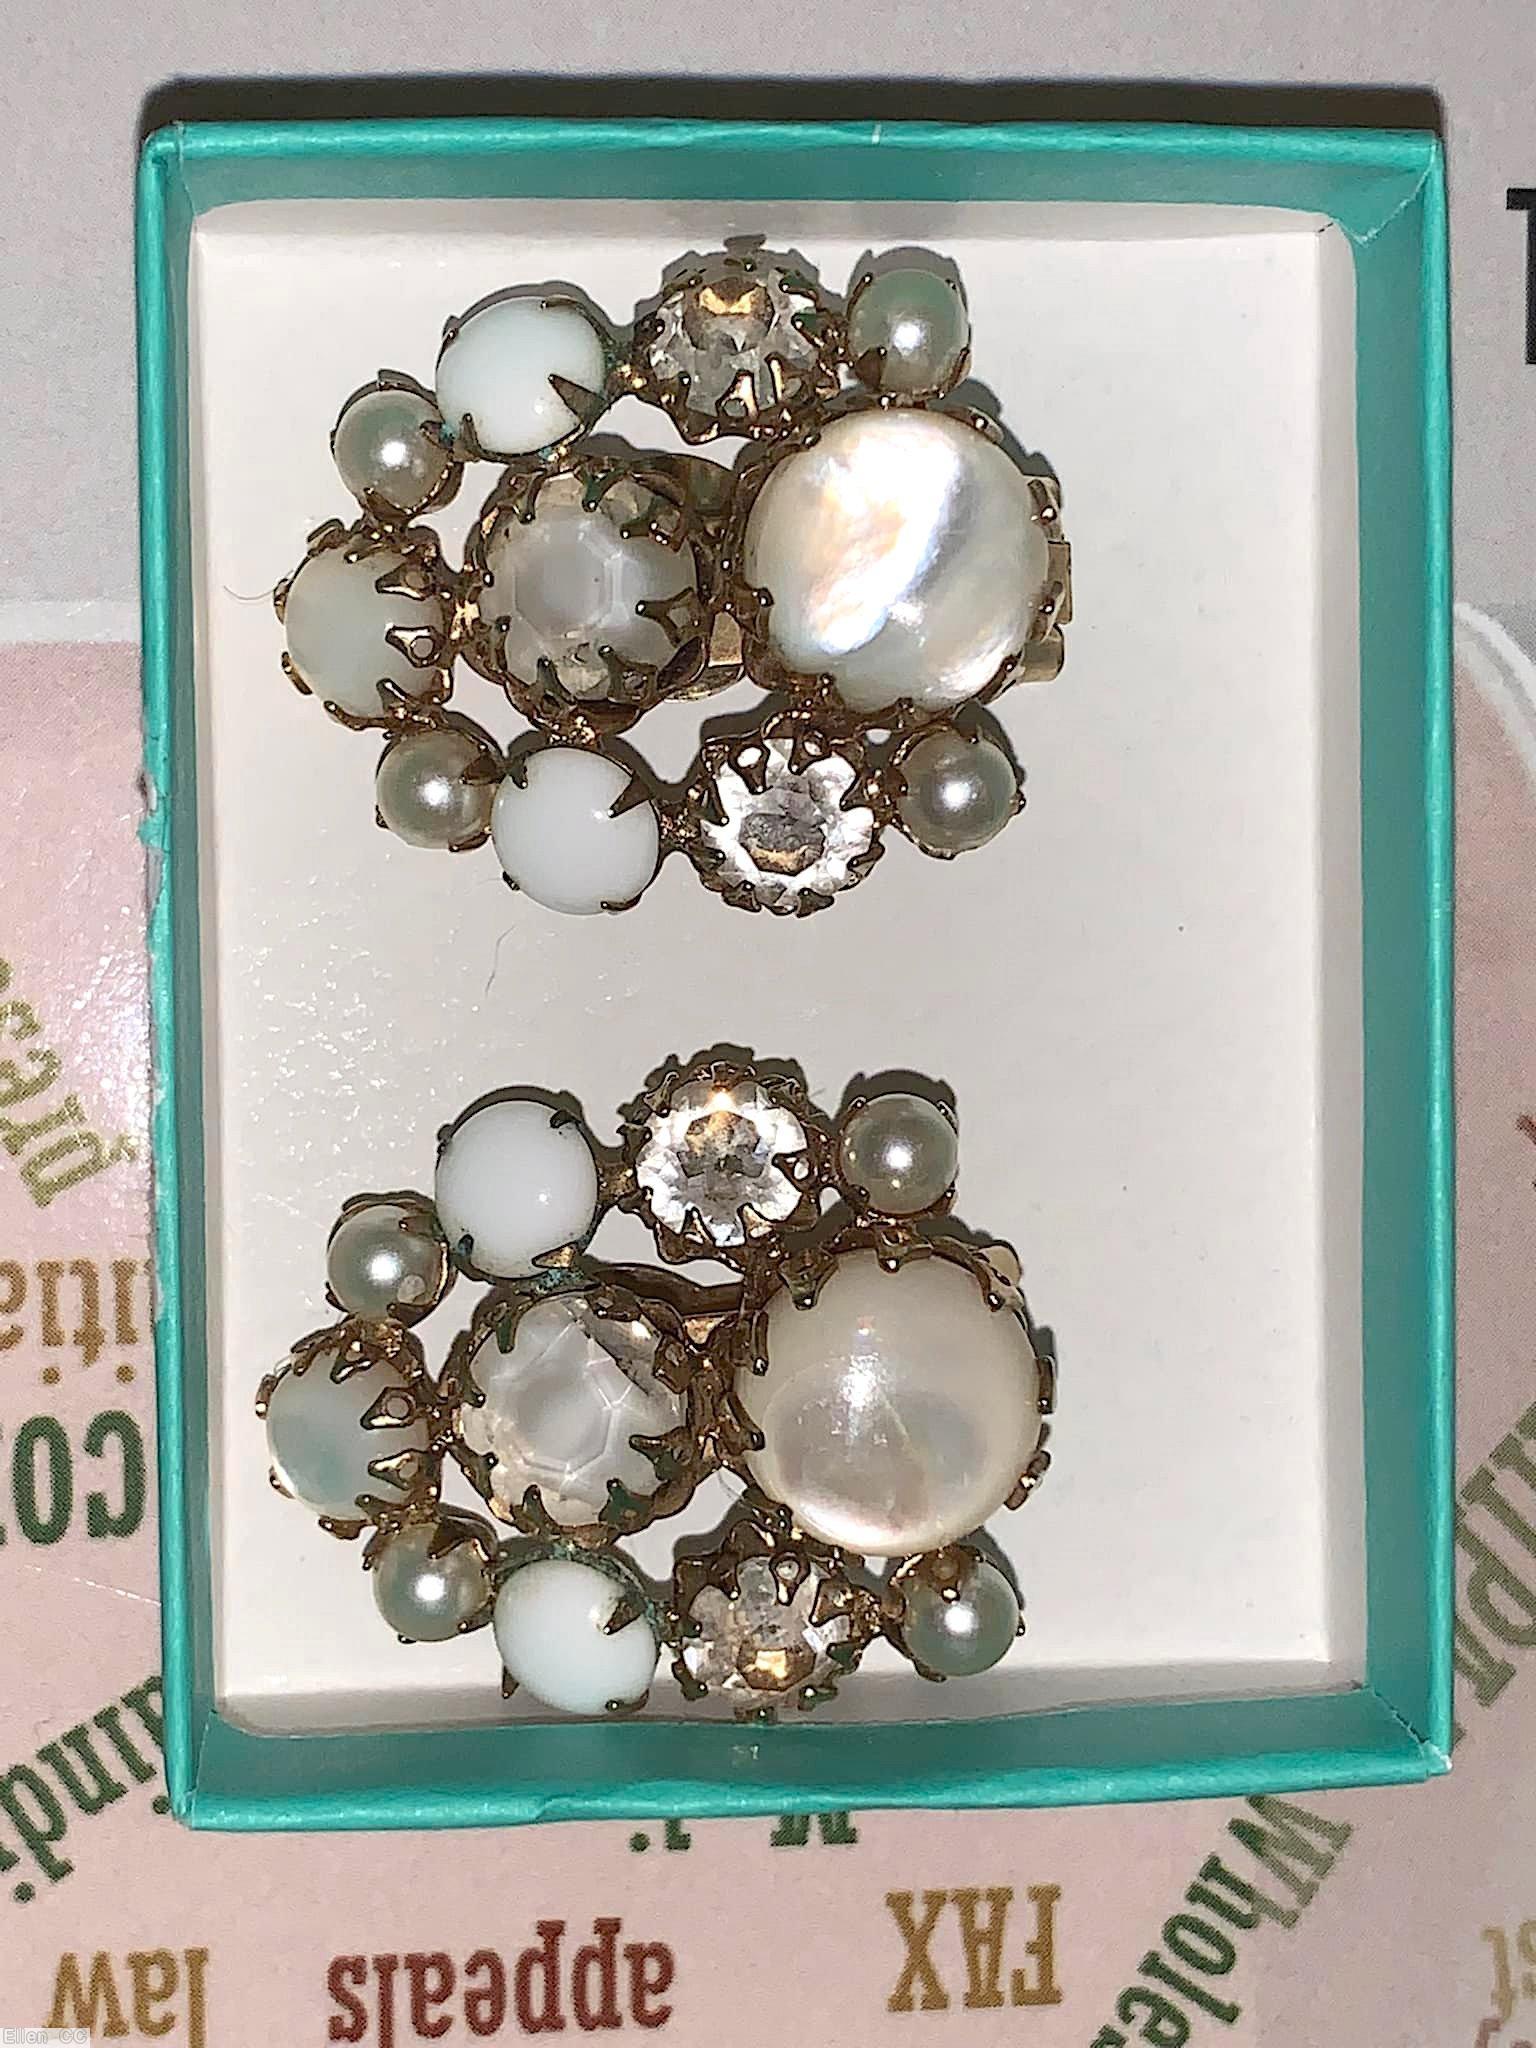 Schreiner shield shaped earring 2 center large chaton 9 surrounding varied size small chaton moonglow white chaton crystal small faux pearl jewelry